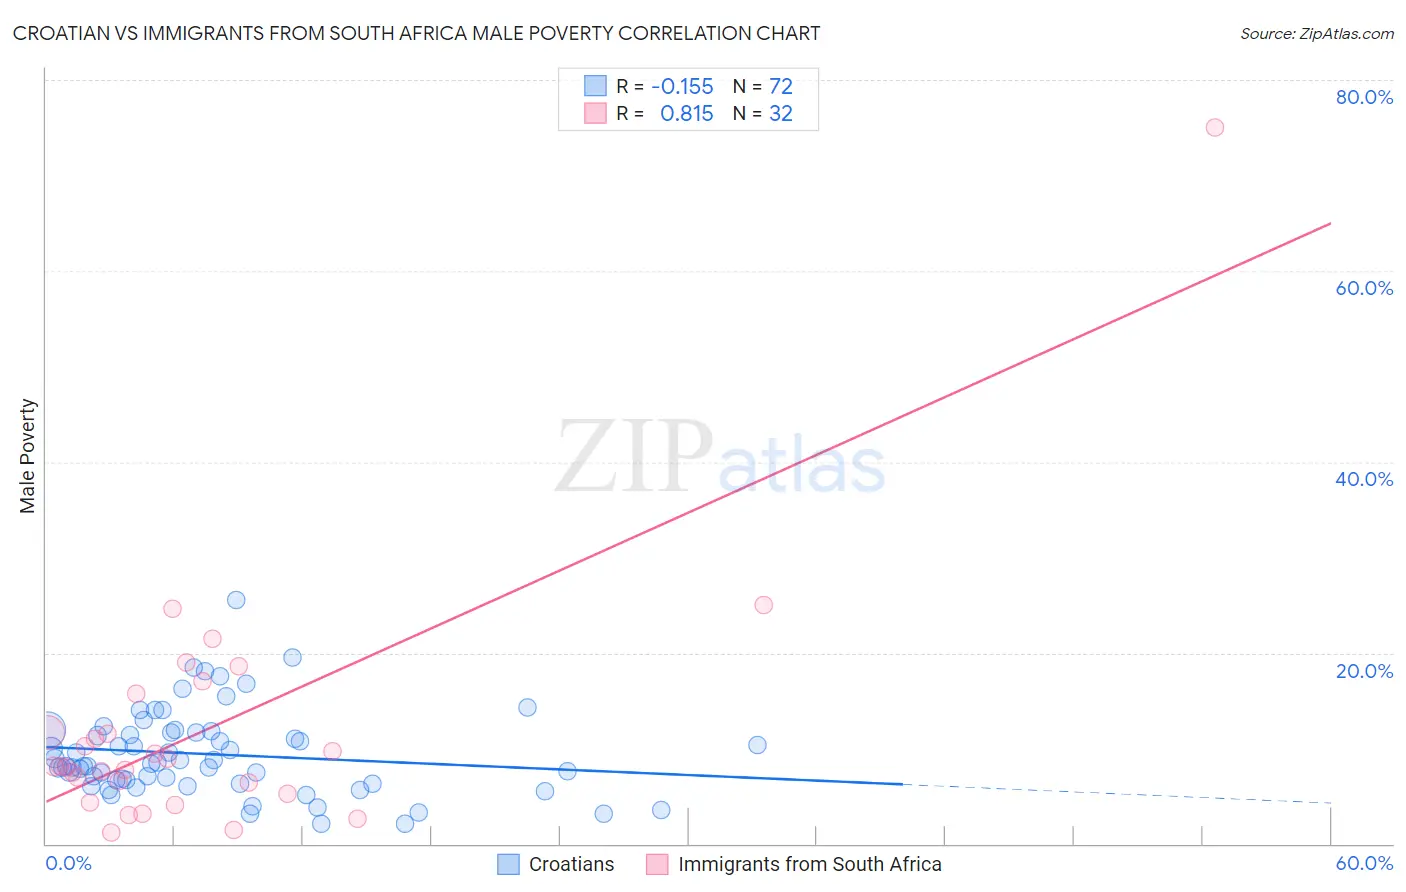 Croatian vs Immigrants from South Africa Male Poverty